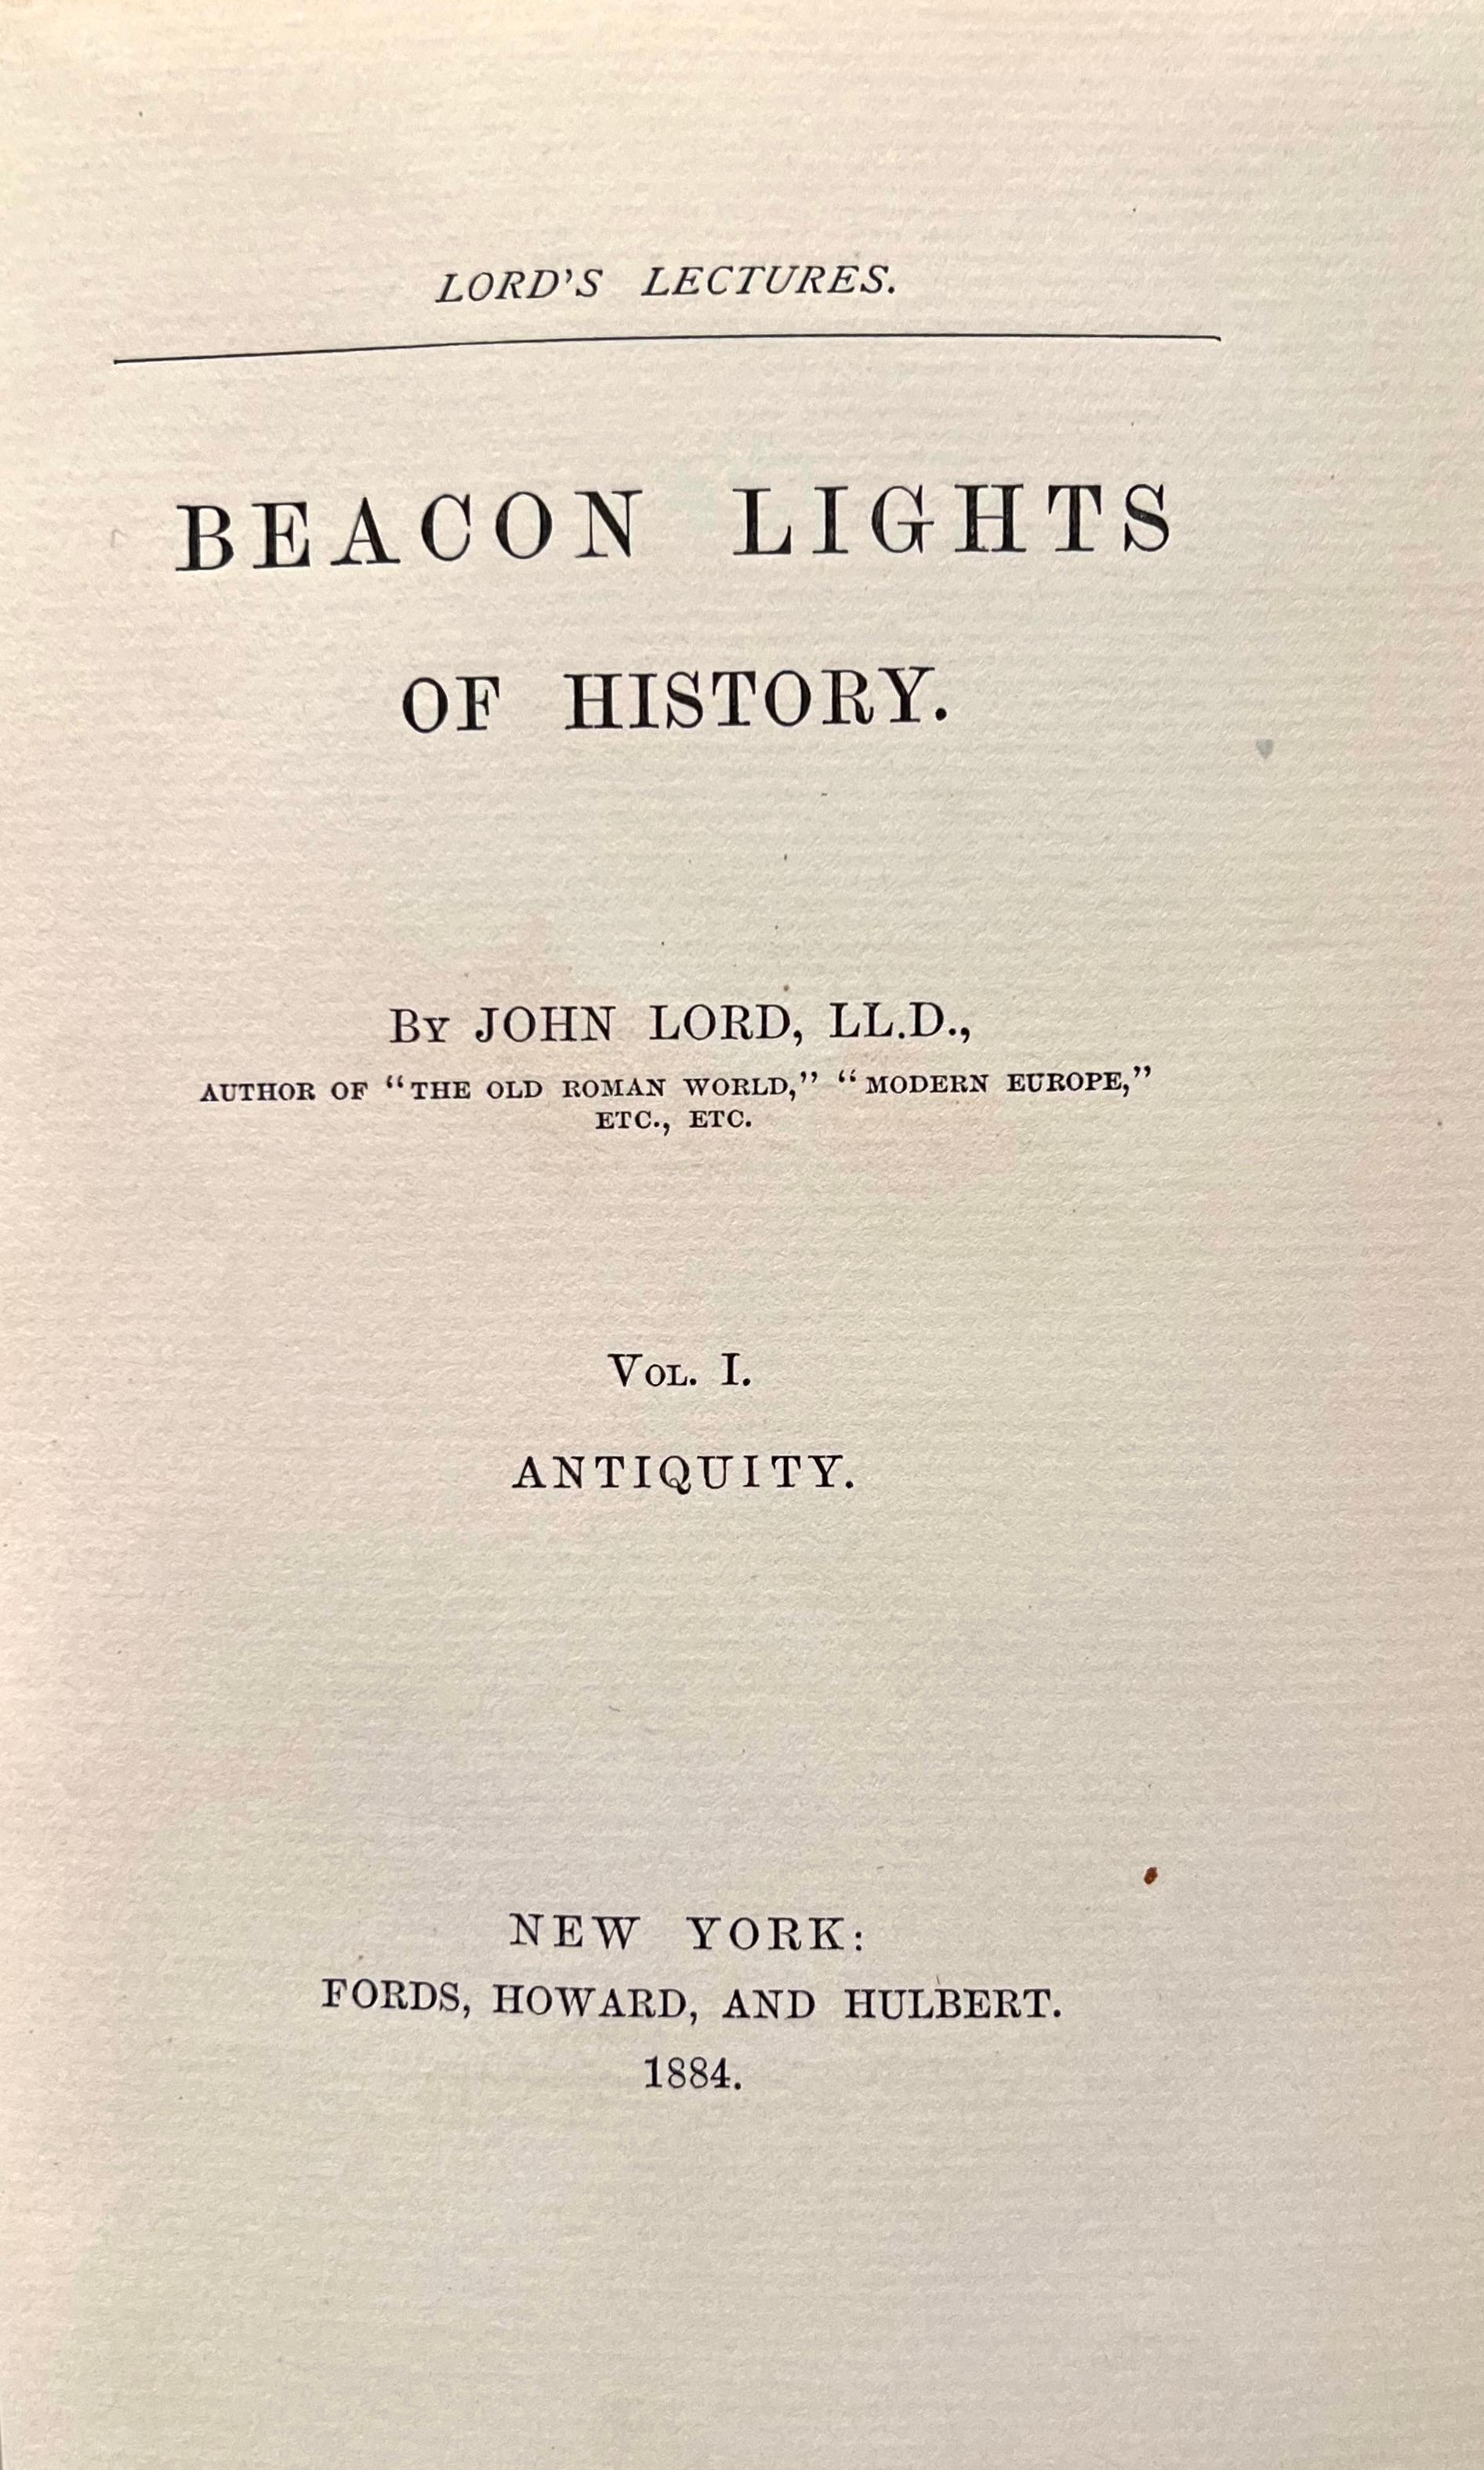 Beacon Lights of History by John Lord in 5 volumes For Sale 1